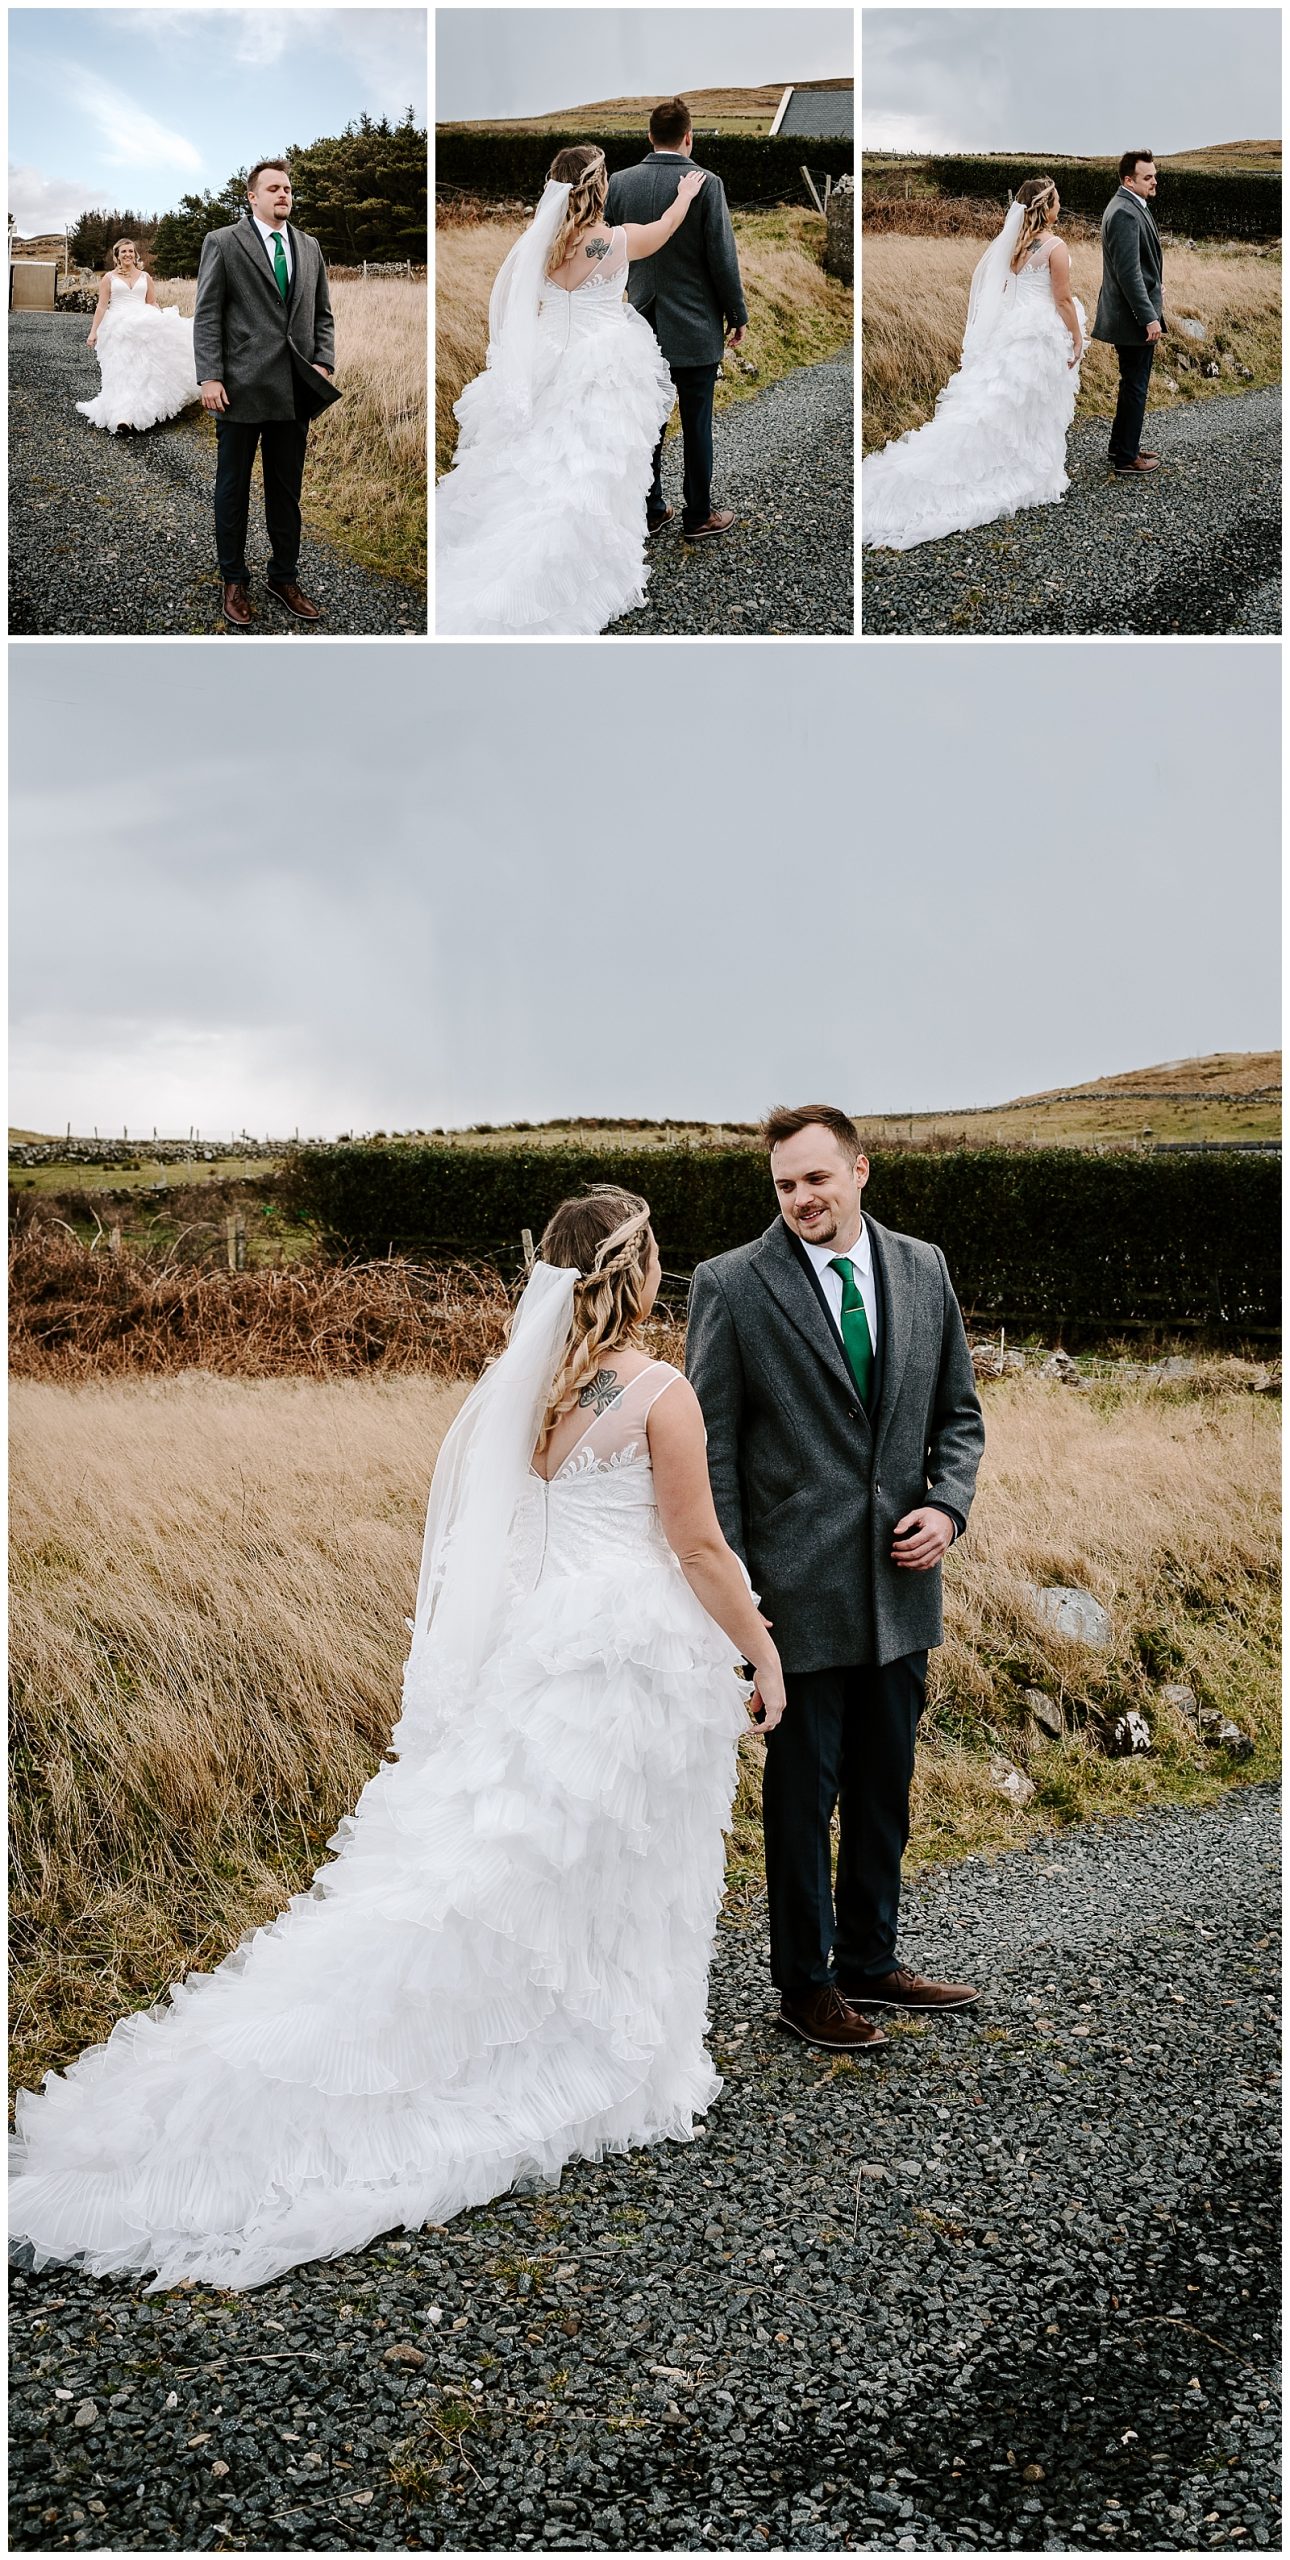 Couple shares a first look as they elope in Ireland.